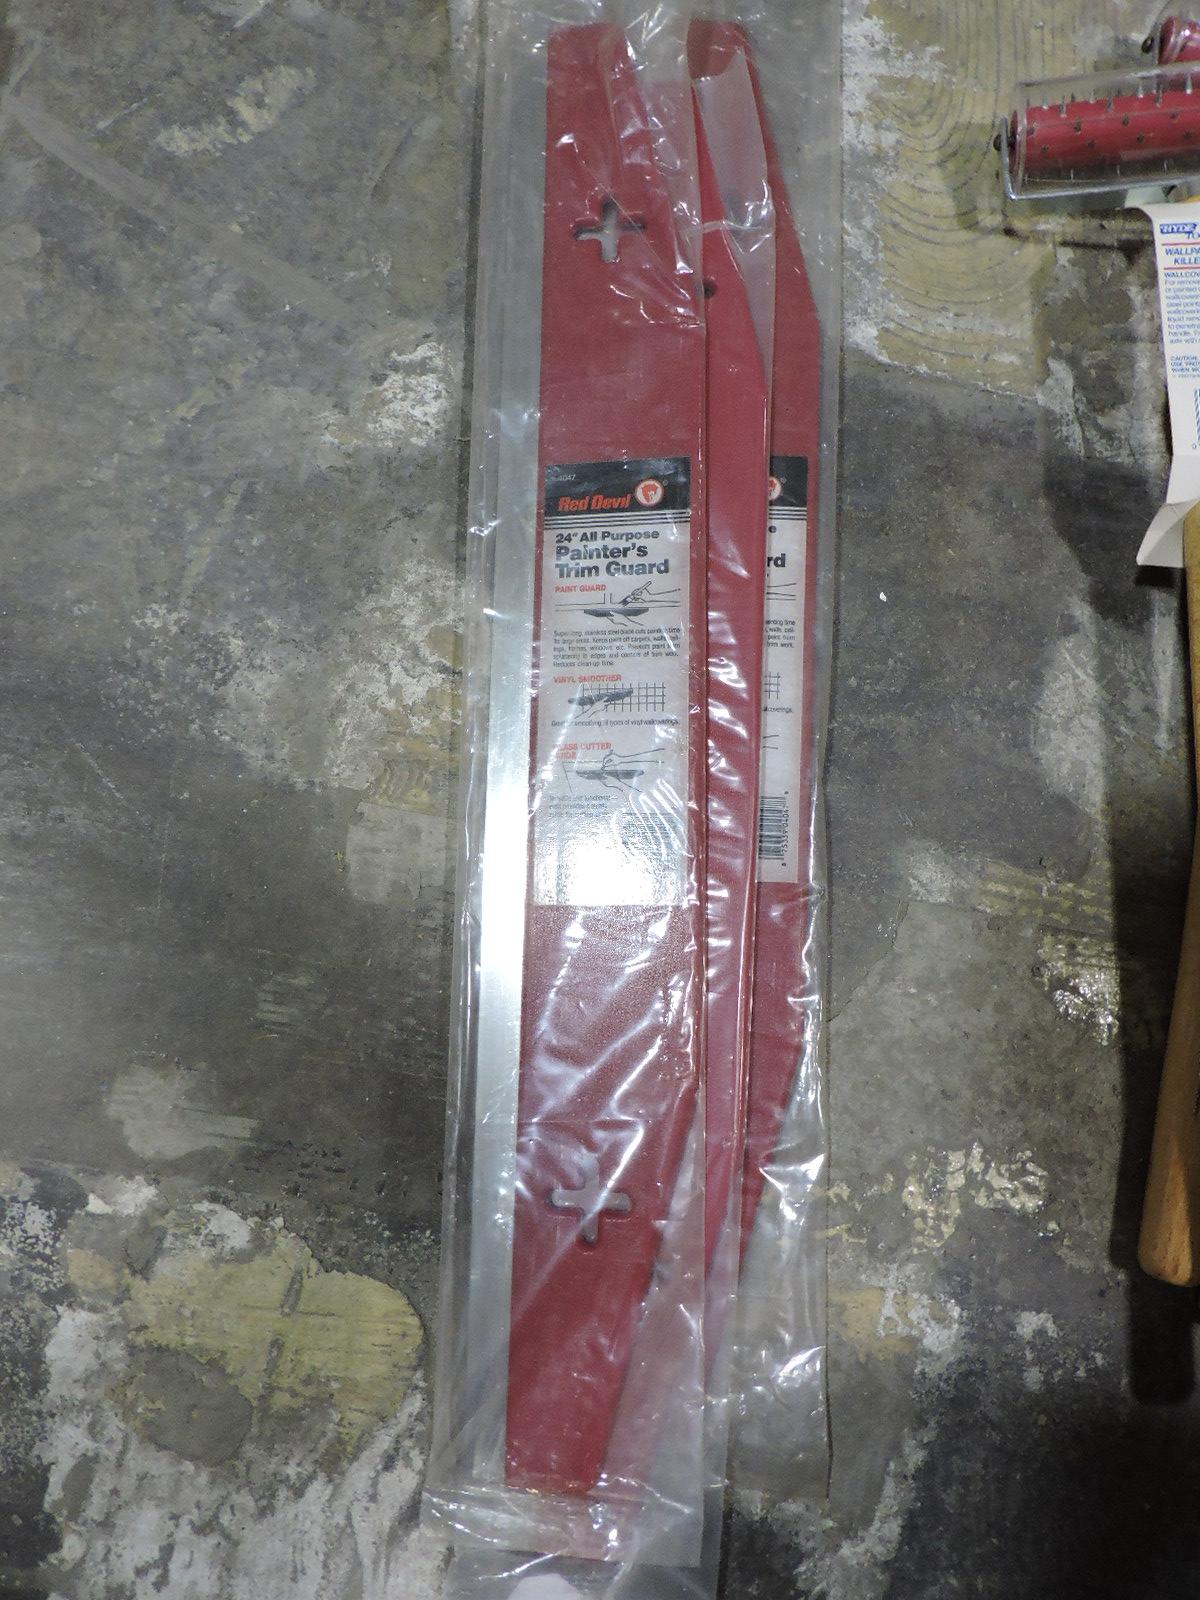 3 RED DEVIL 24" Painters Trim Guard # 4047 -- NEW Old Stock